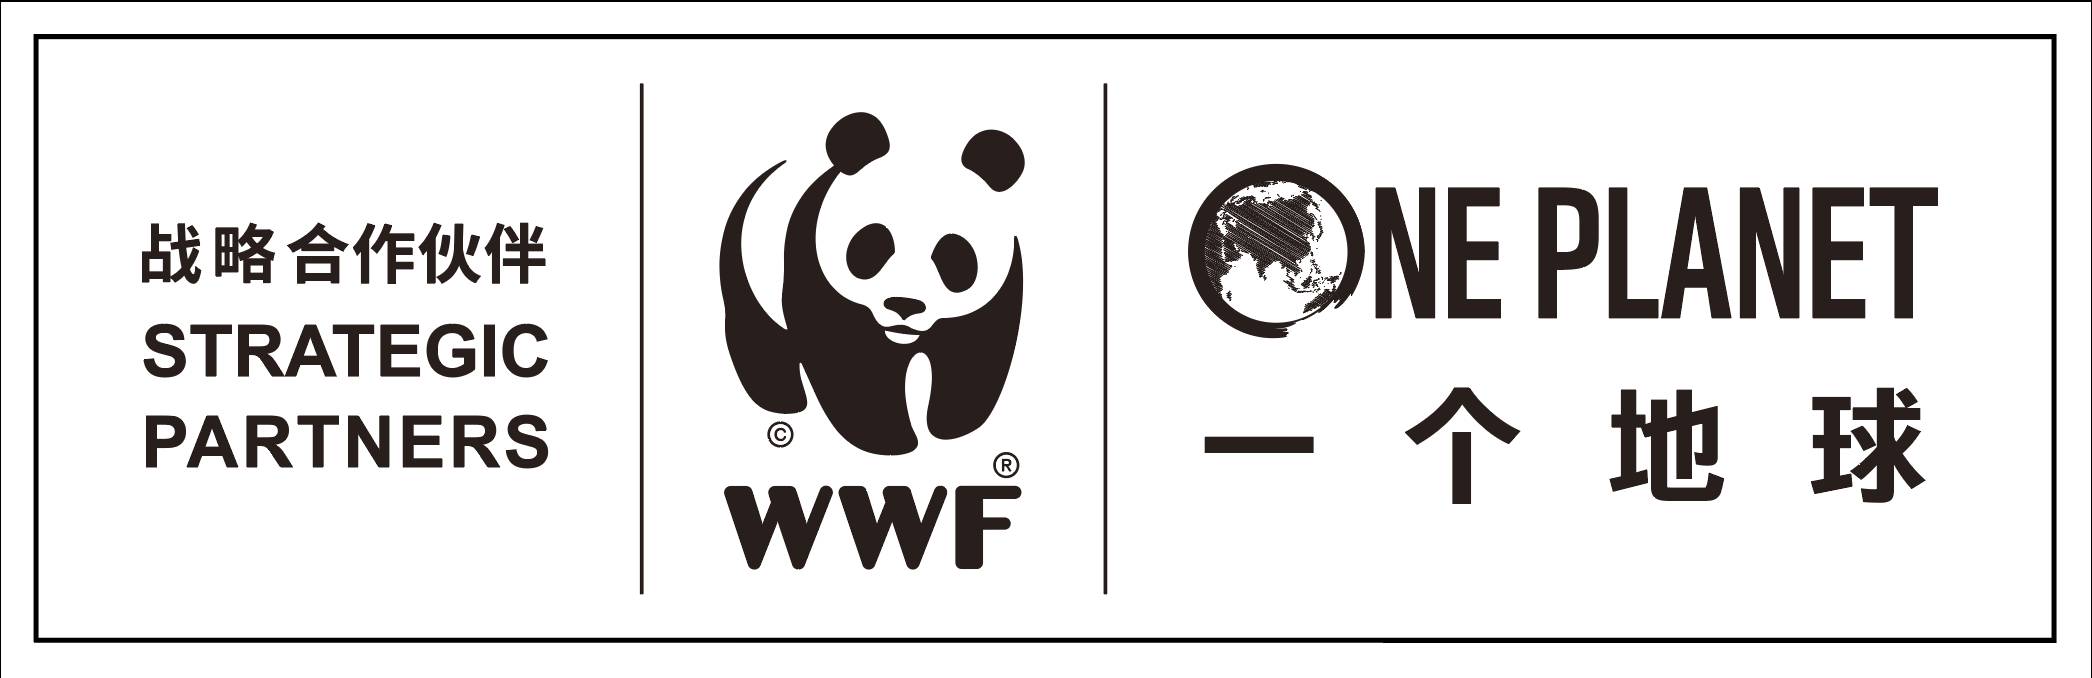 One Planet Foundation (OPF)